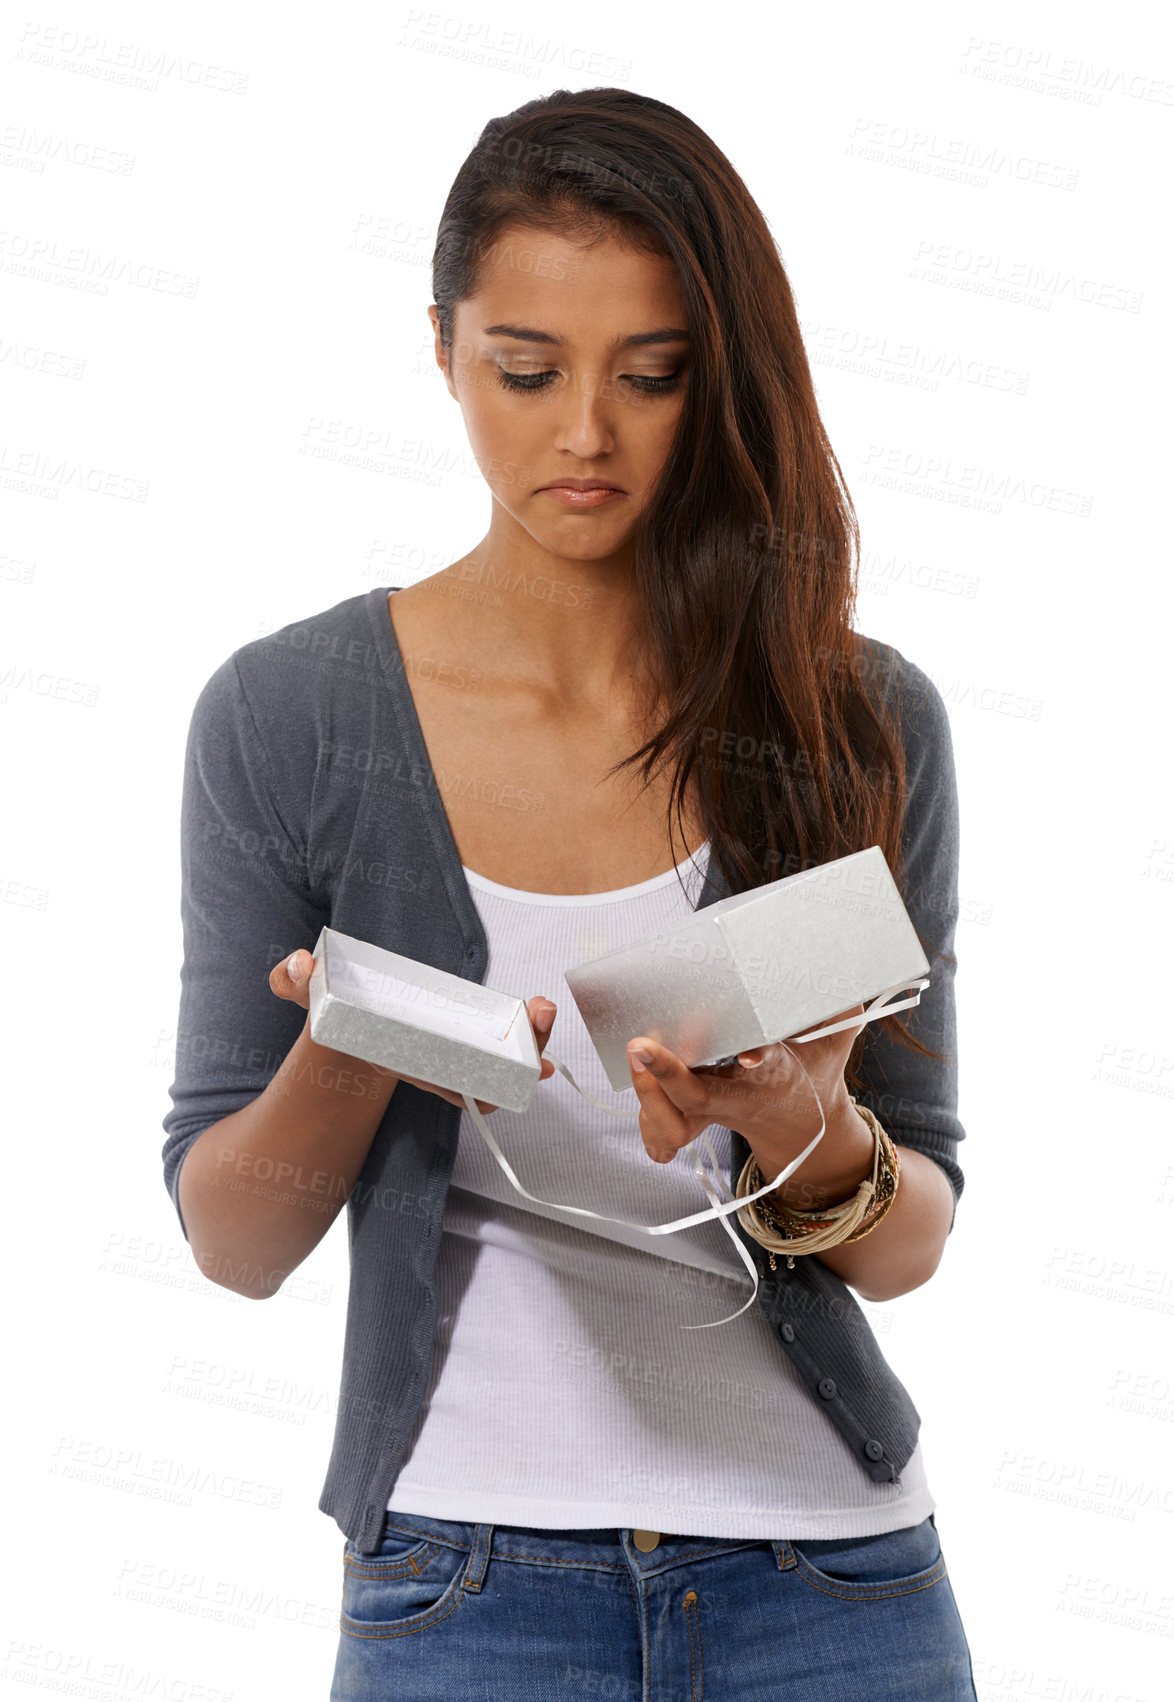 Buy stock photo Disappointed young woman holding an empty gift box against a white background